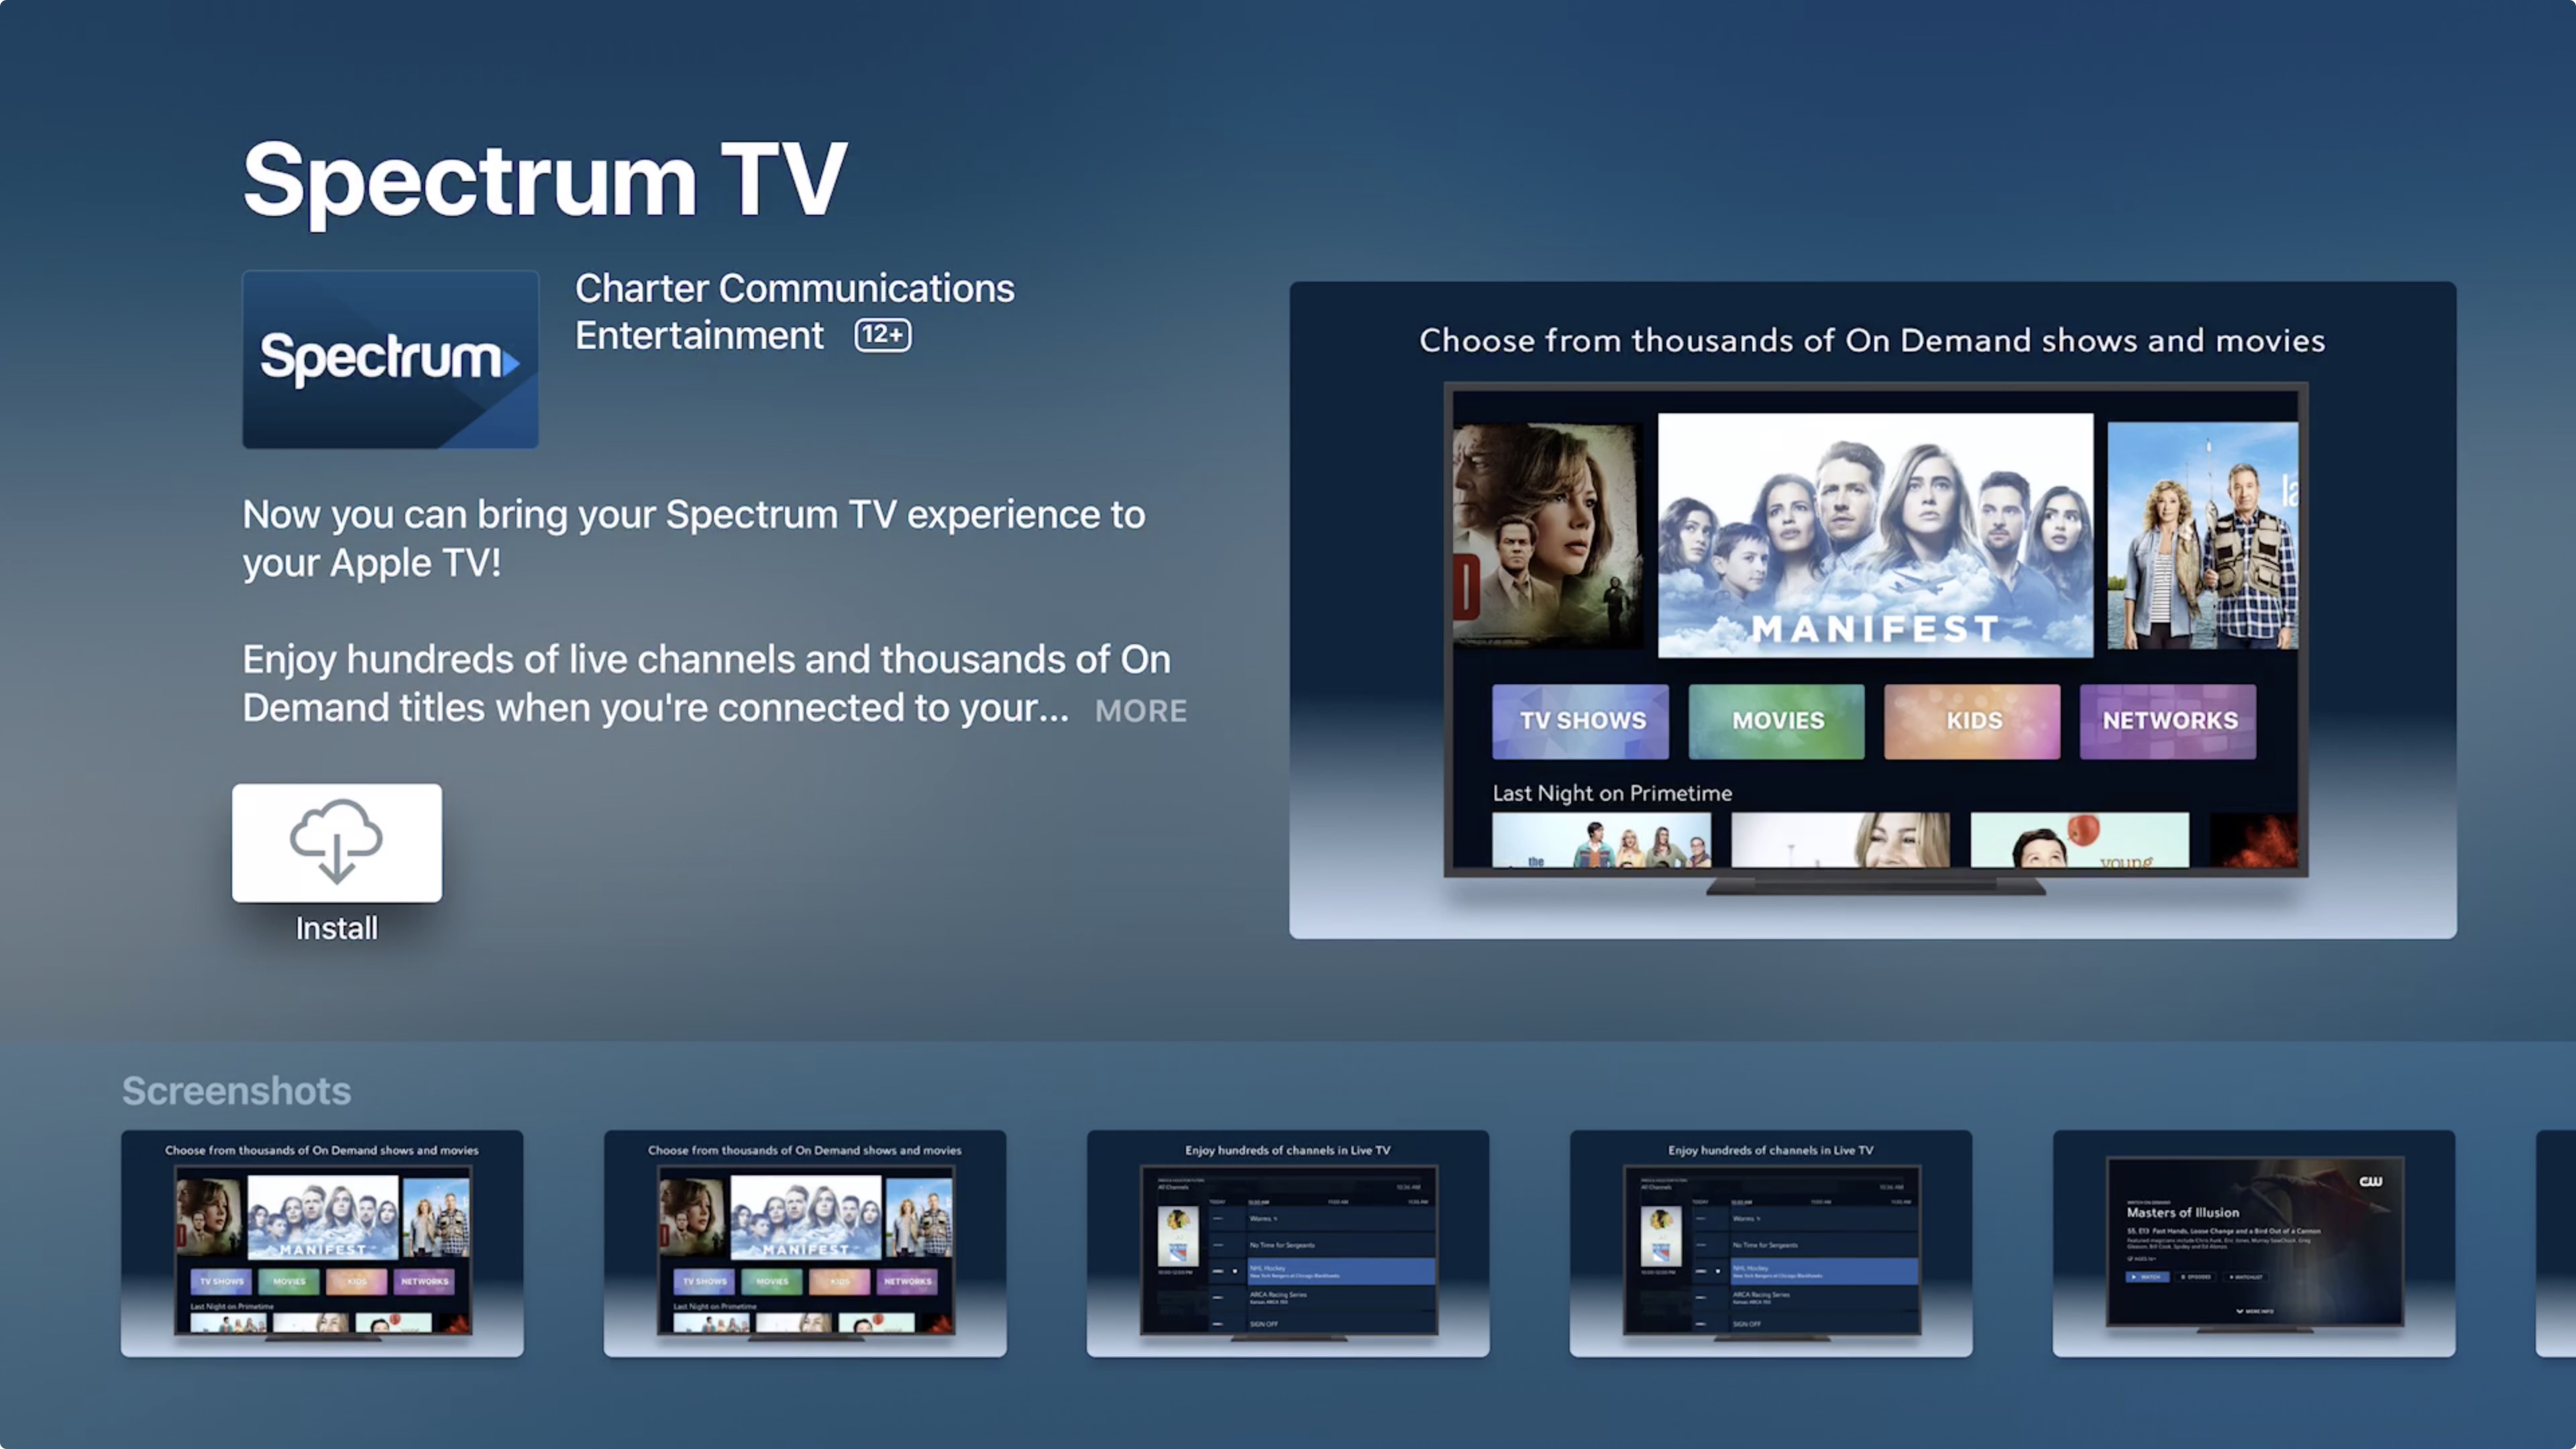 Spectrum TV app for Apple TV released, heres how to use it